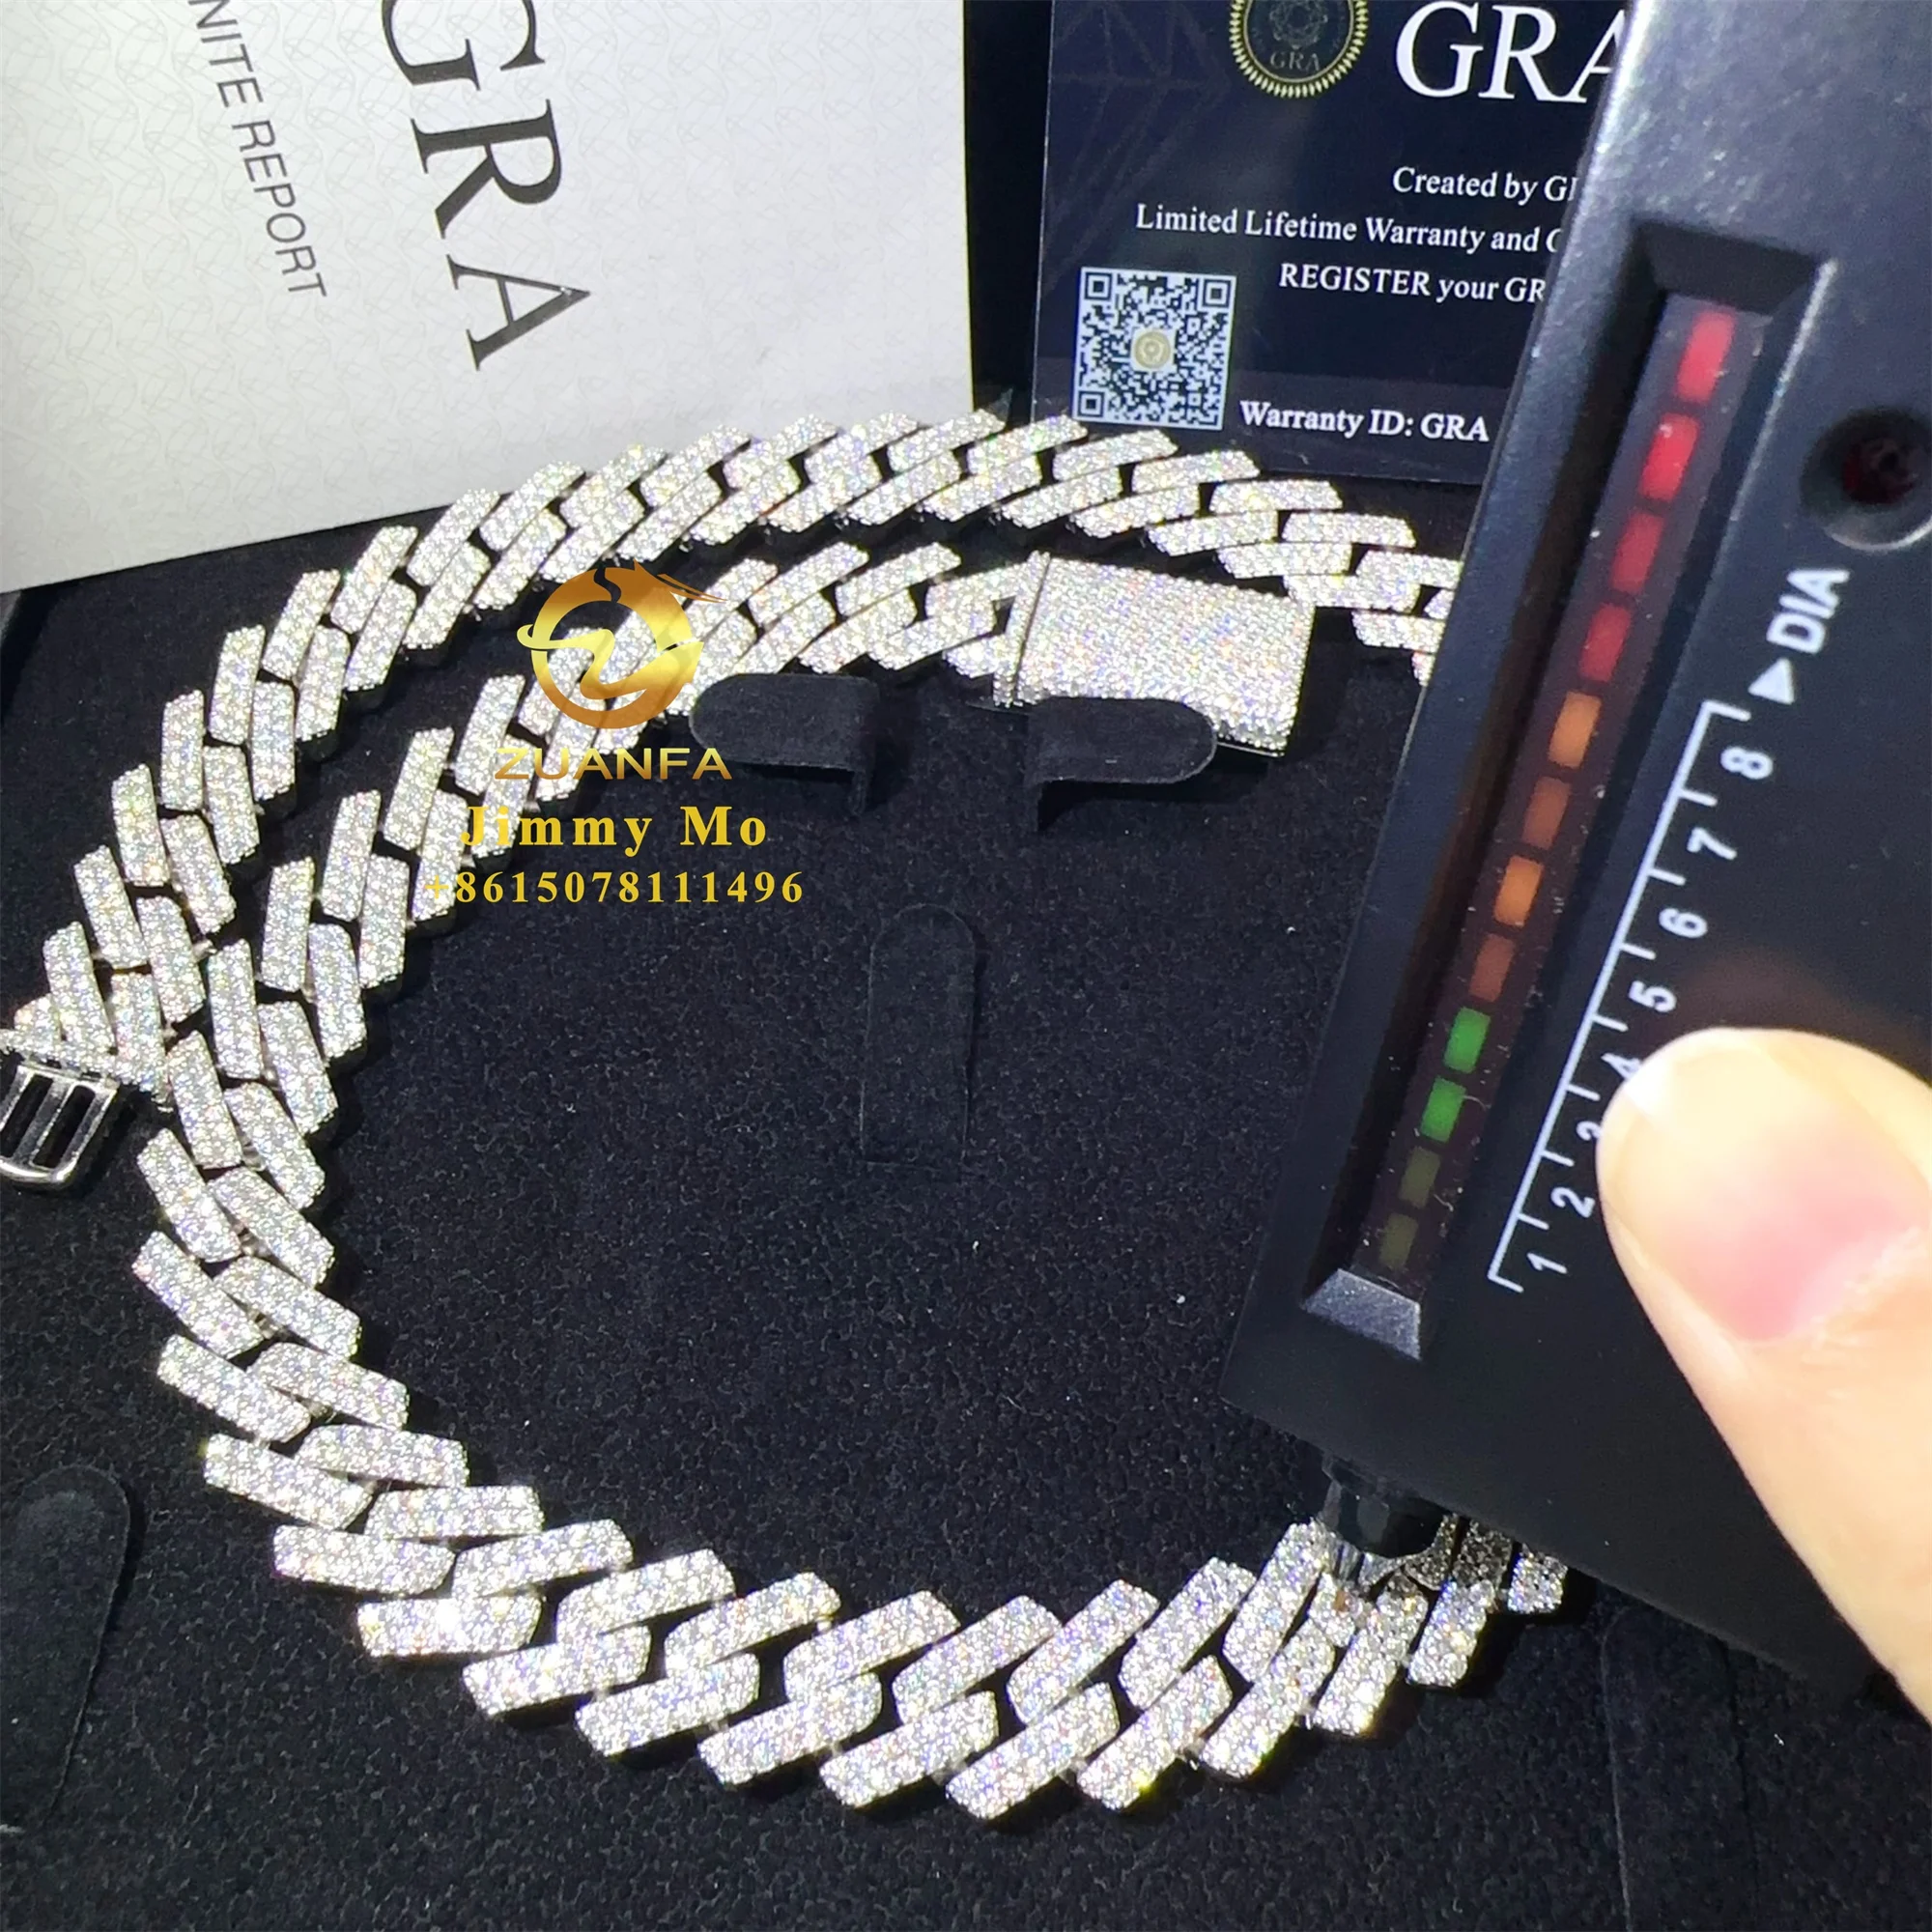 

Hot Selling Bulk Stock Pass Diamond Tester 925 Solid Silver 15mm Two Rows Iced Out Hip Hop VVS1 Moissanite Cuban Link Chain